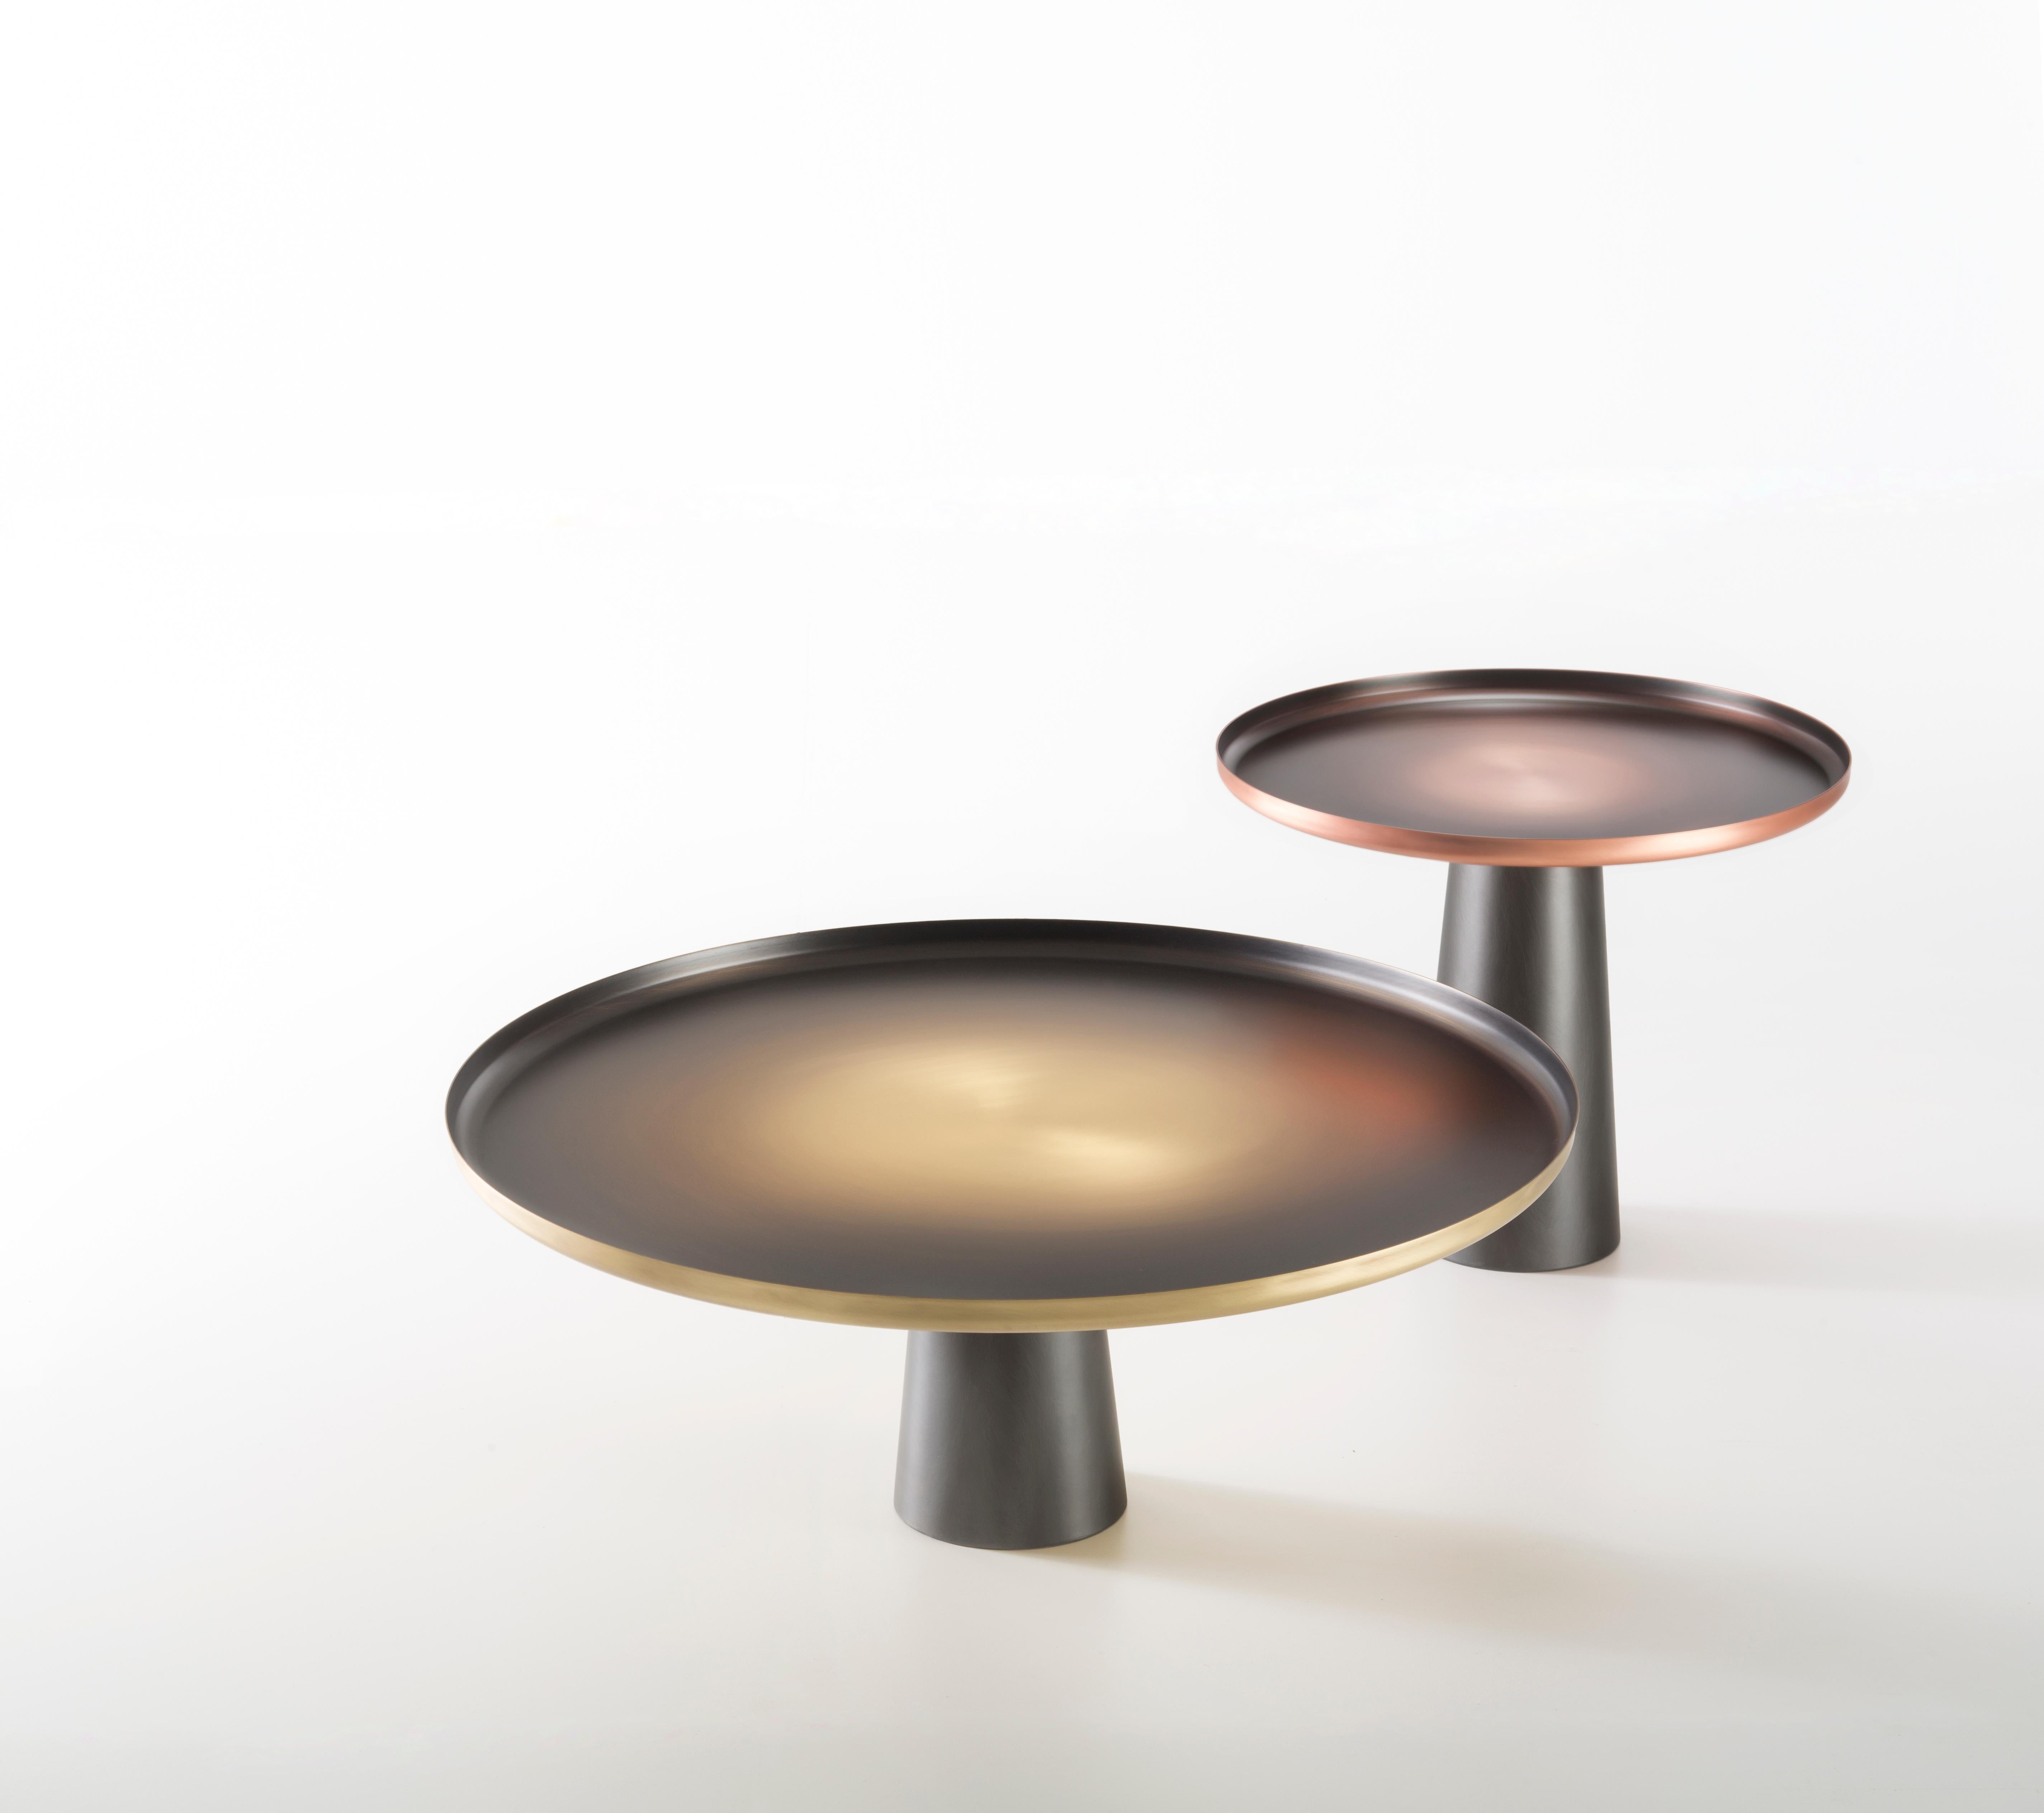 Two side tables, like large suns, emphasize the textural and chromatic characteristics of copper and brass. Contrasting with the DeLabré iron of the base, the top is ennobled by a hand-crafted finish. Here the material takes shape in all its purity,